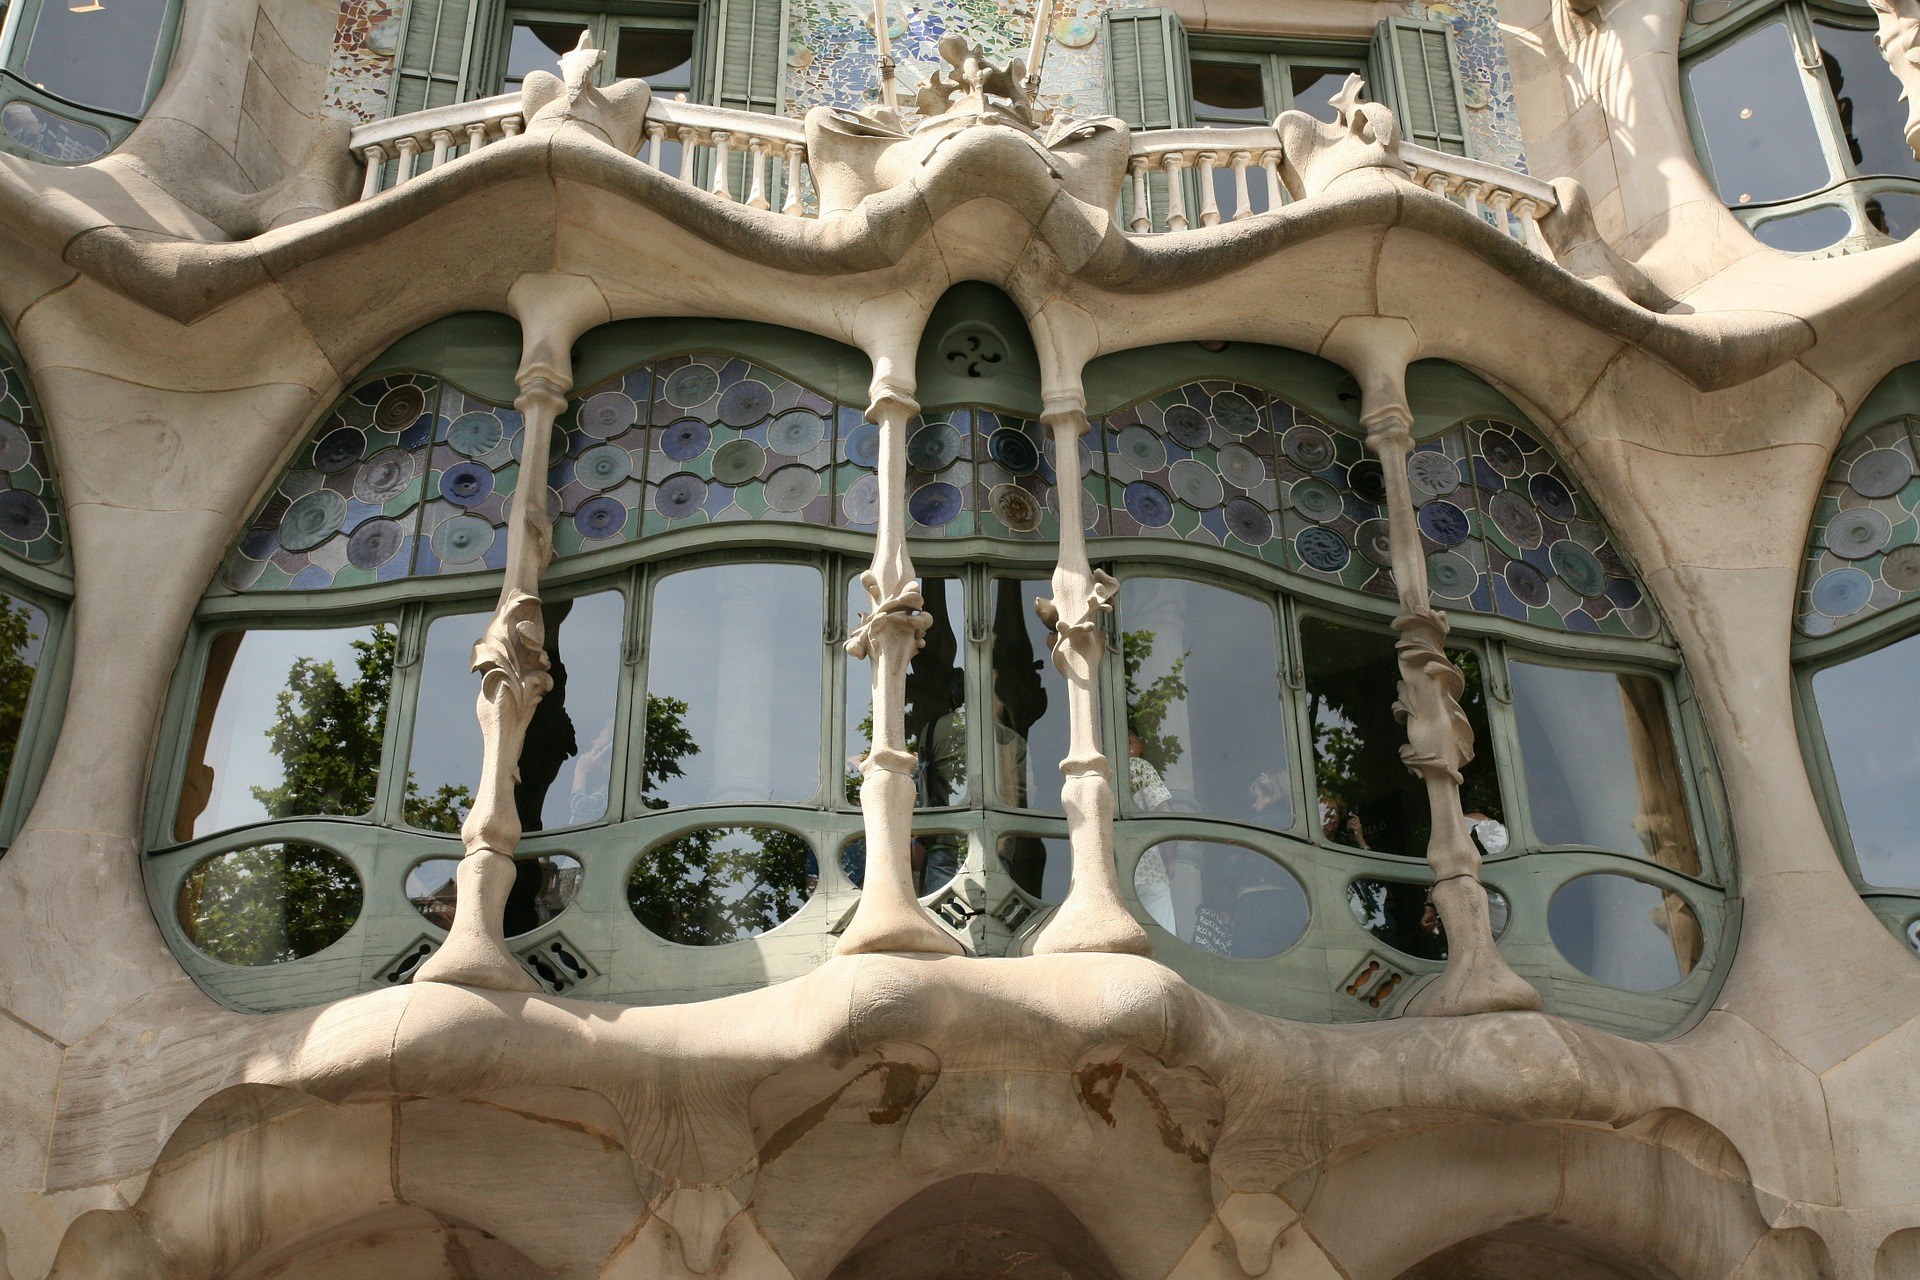 Visiting Barcelona: 5 Places Not to Miss - Casa Batlló